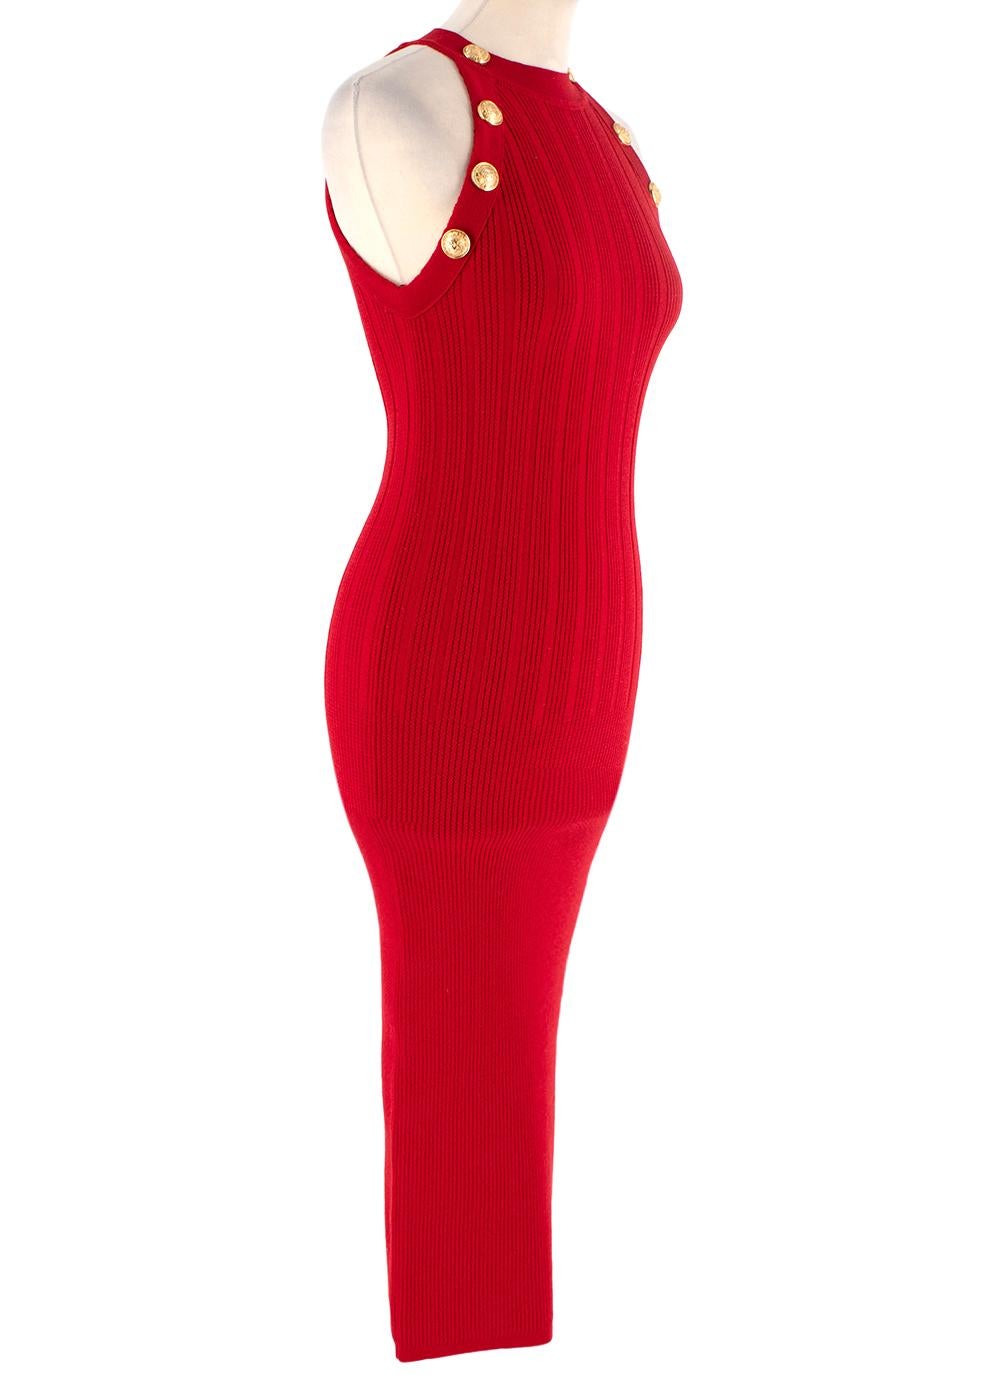 Balmain Red Sleeveless Rib-Knit Dress

- Bright red, form-fitting sheath dress crafted from ribbed stretch-knit
- Halter-style round neck, sleeveless with armholes adorned with signature gold-tone buttons  
- Exposed gold-tone back zip
-